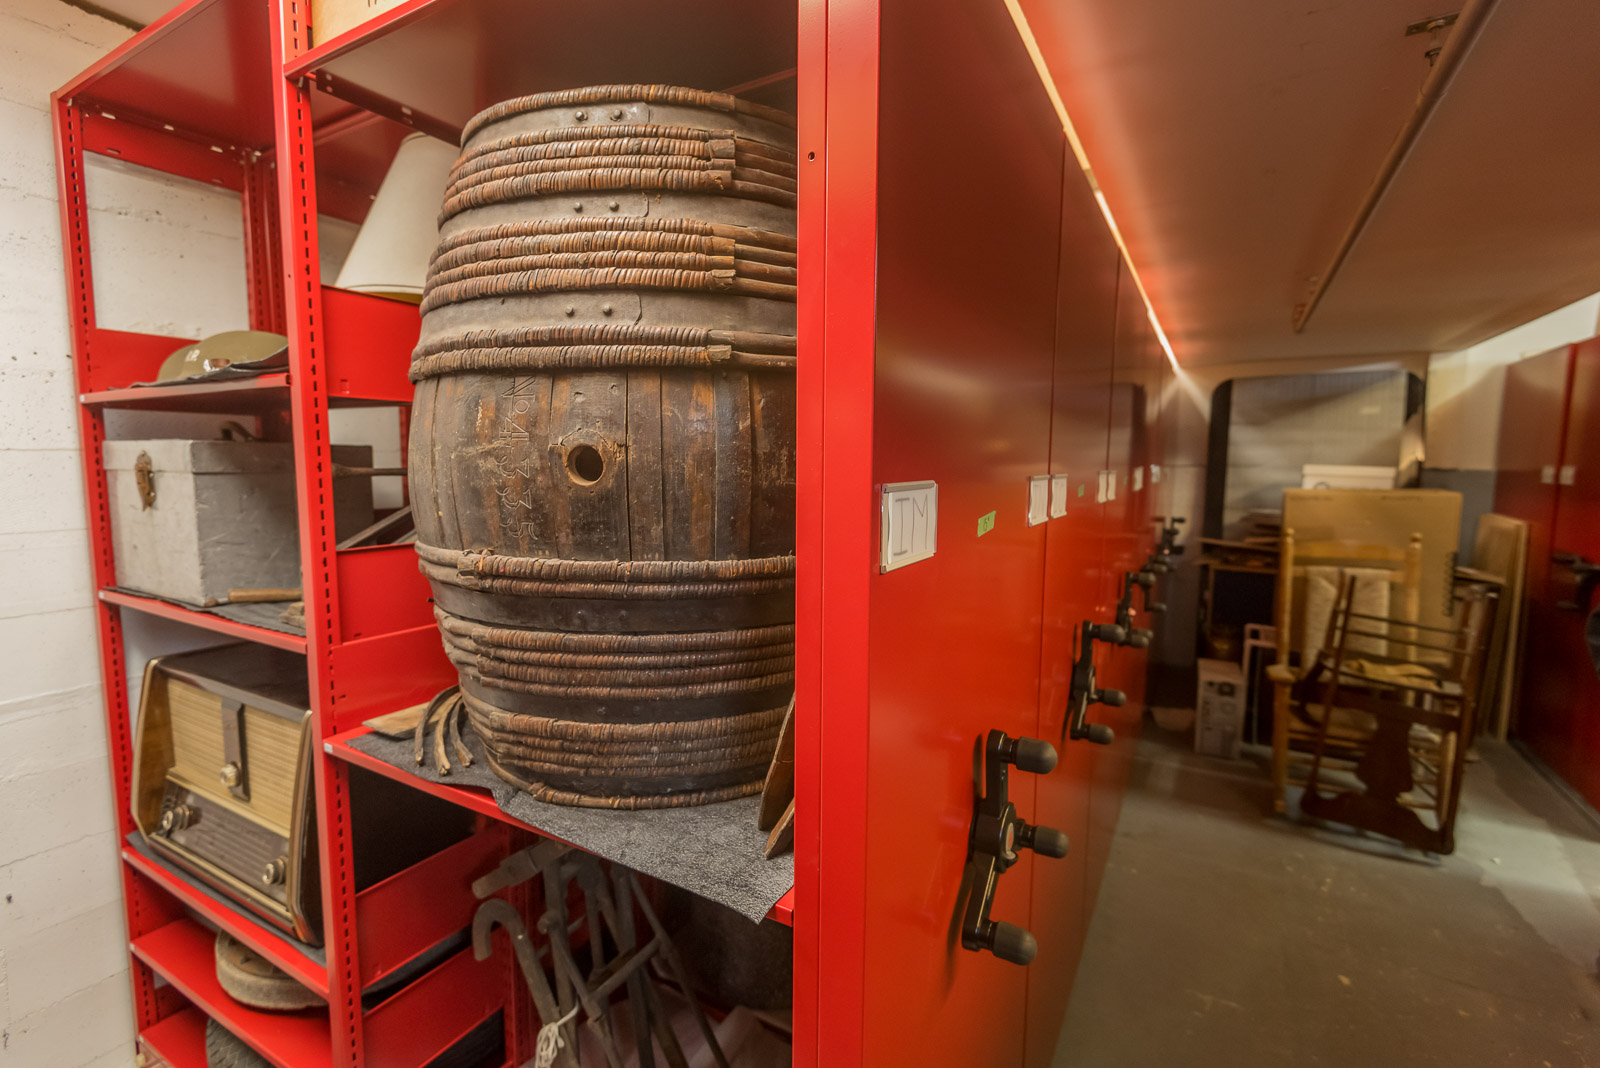 Collection storage located in the basement of the museum